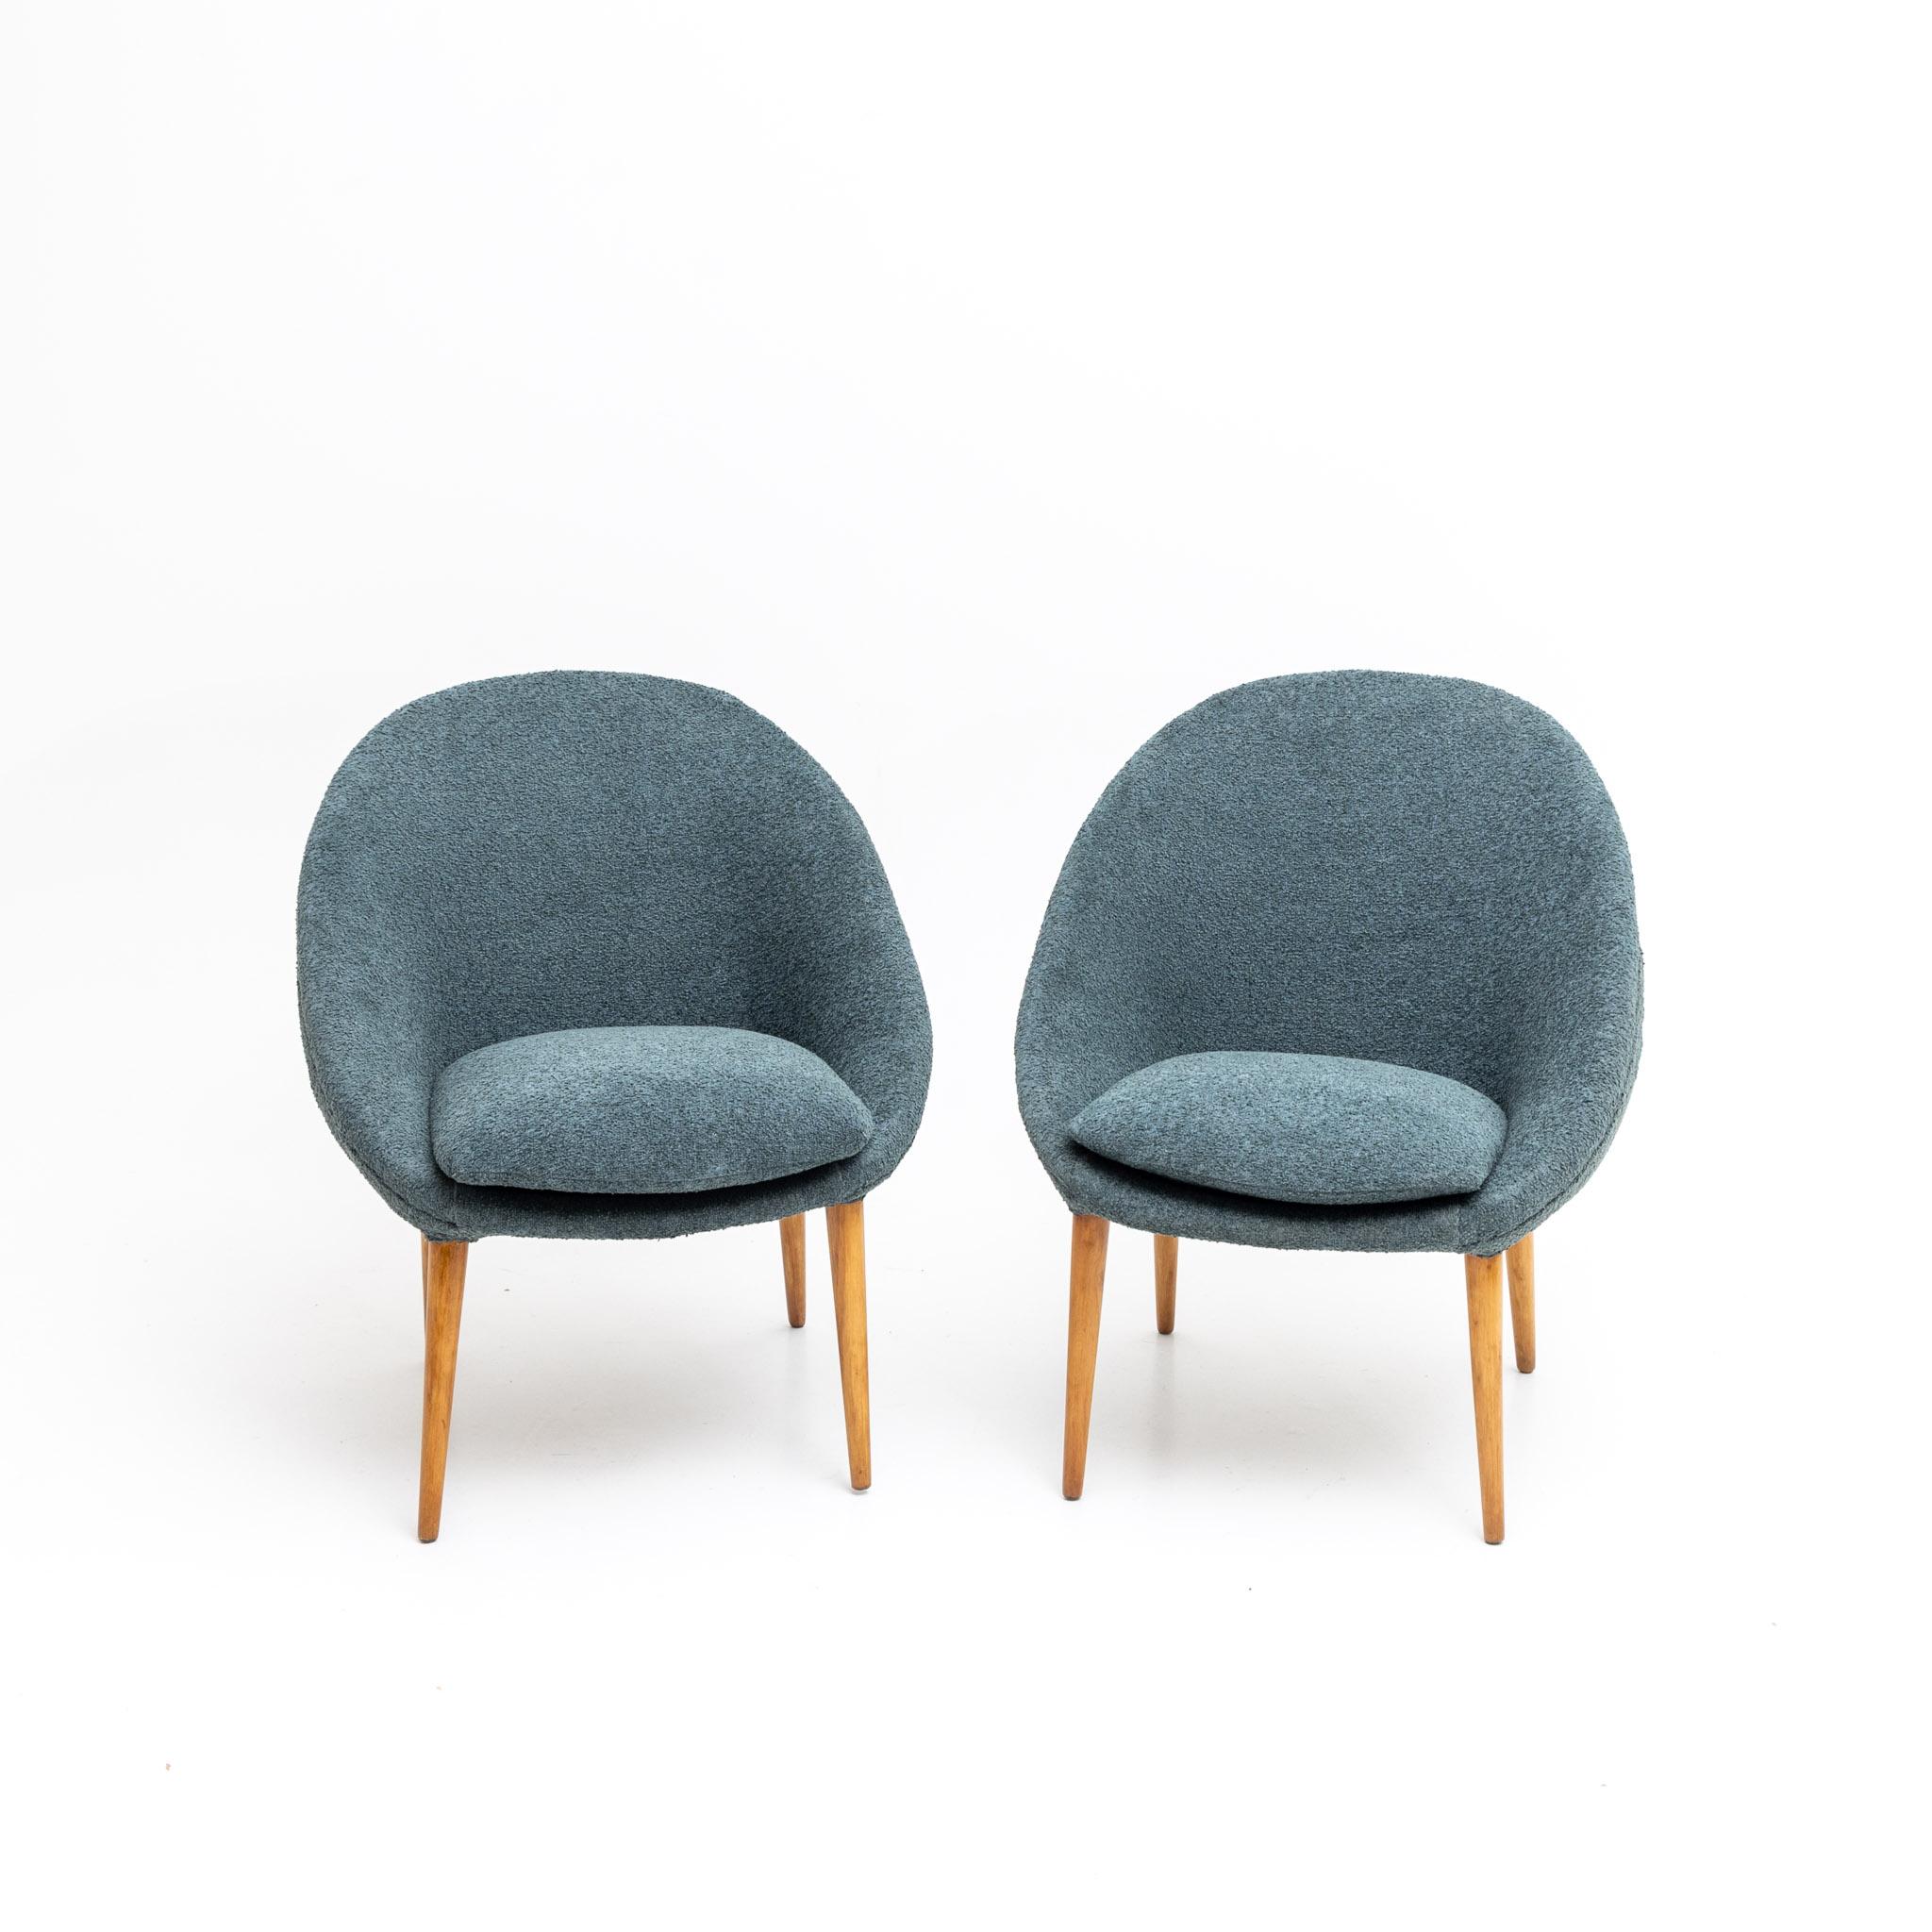 Pair of armchairs with rounded blue upholstered seat shells with cushions on conical pointed feet.